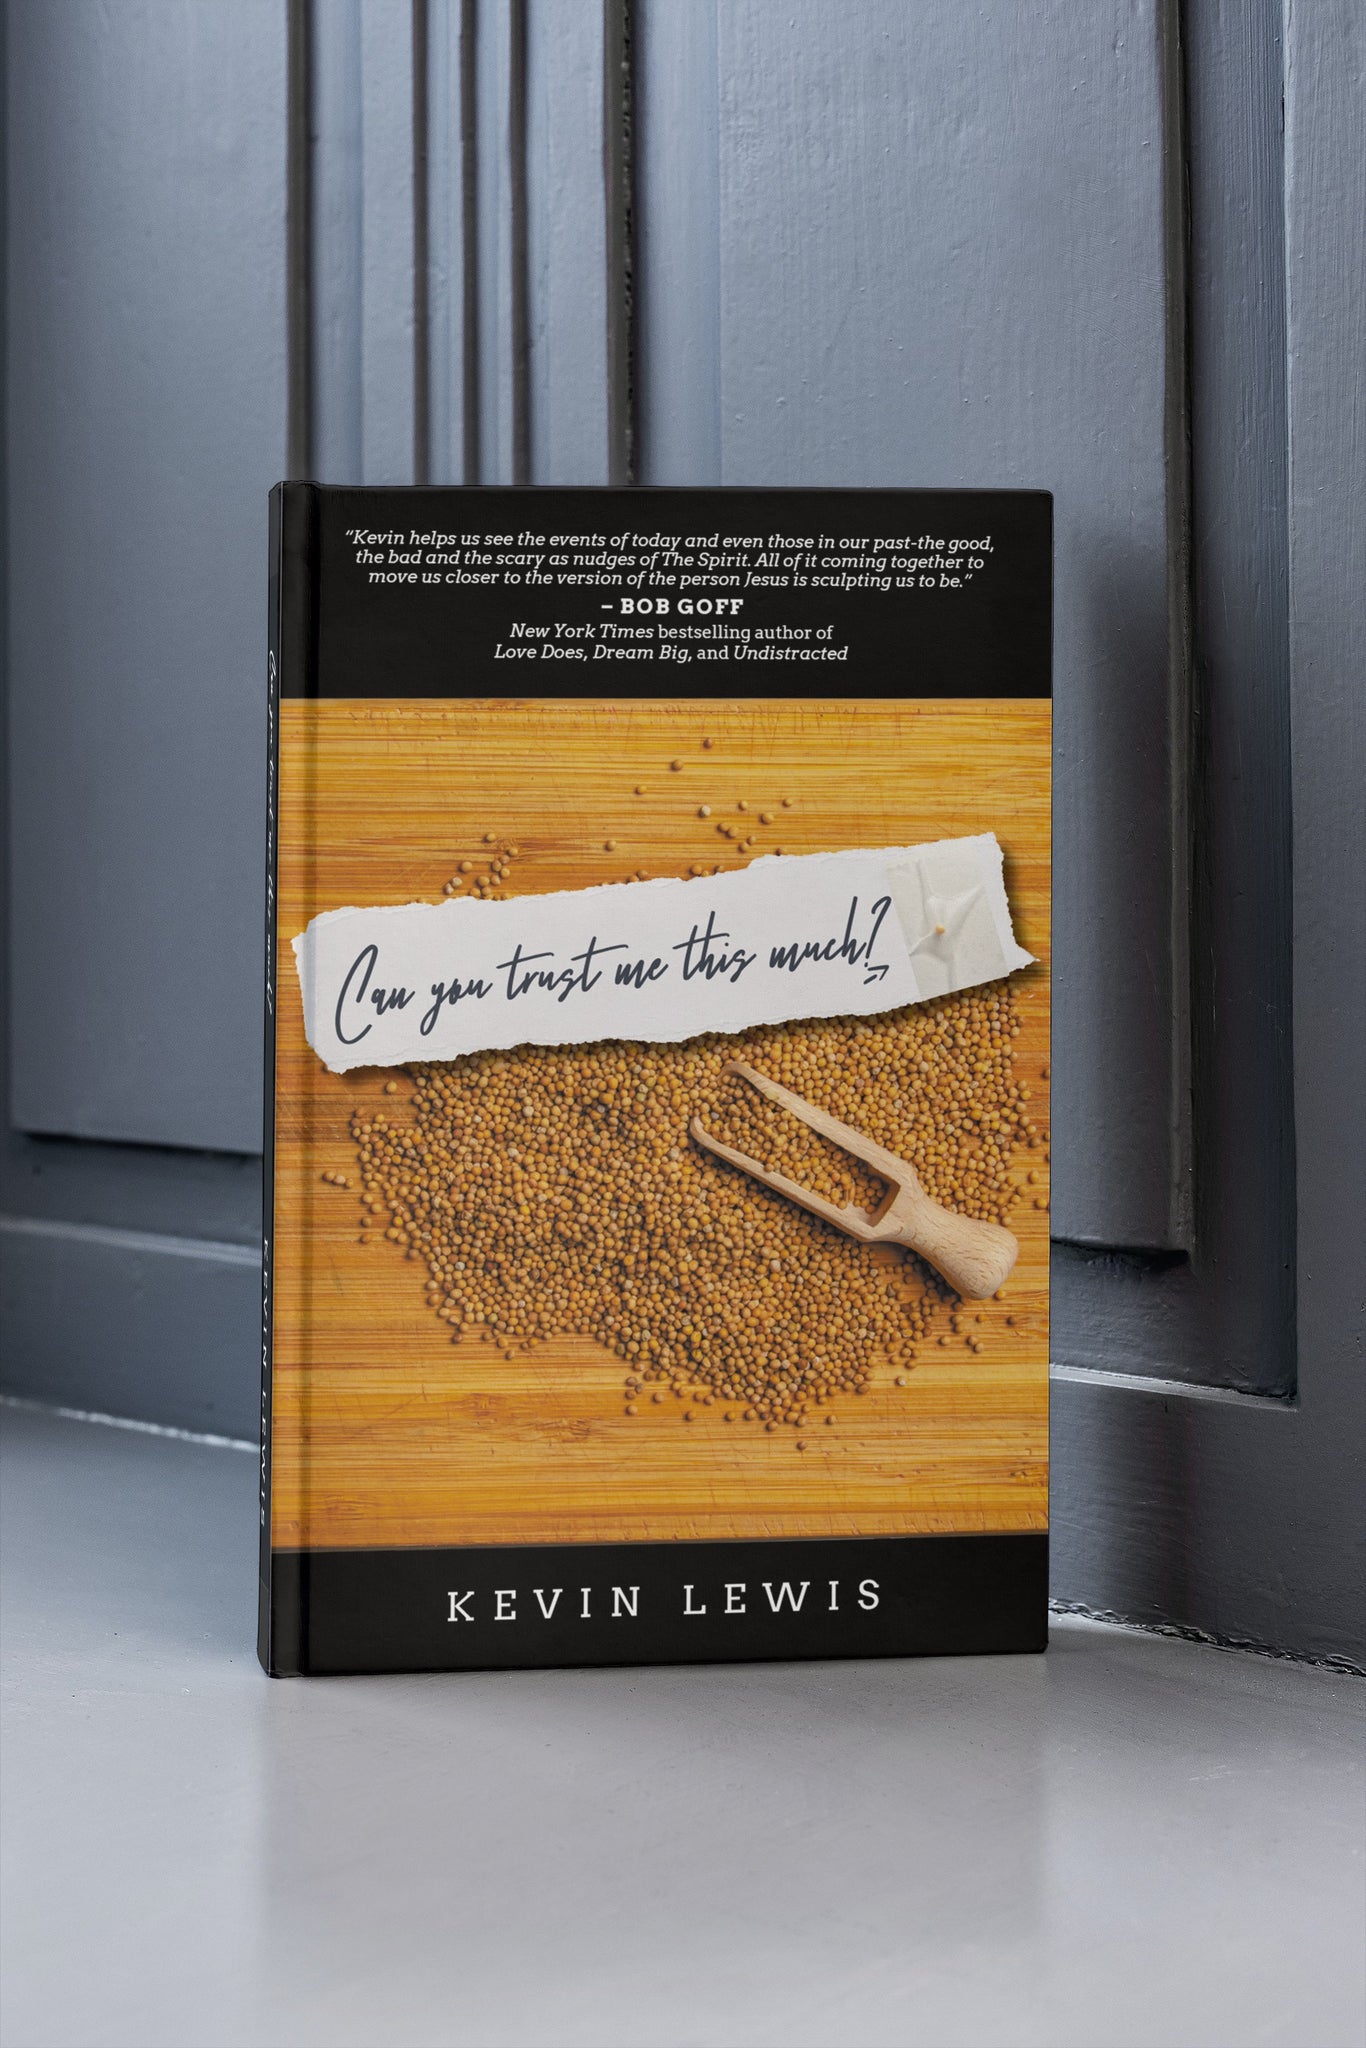 Can You Trust Me This Much? by Kevin Lewis